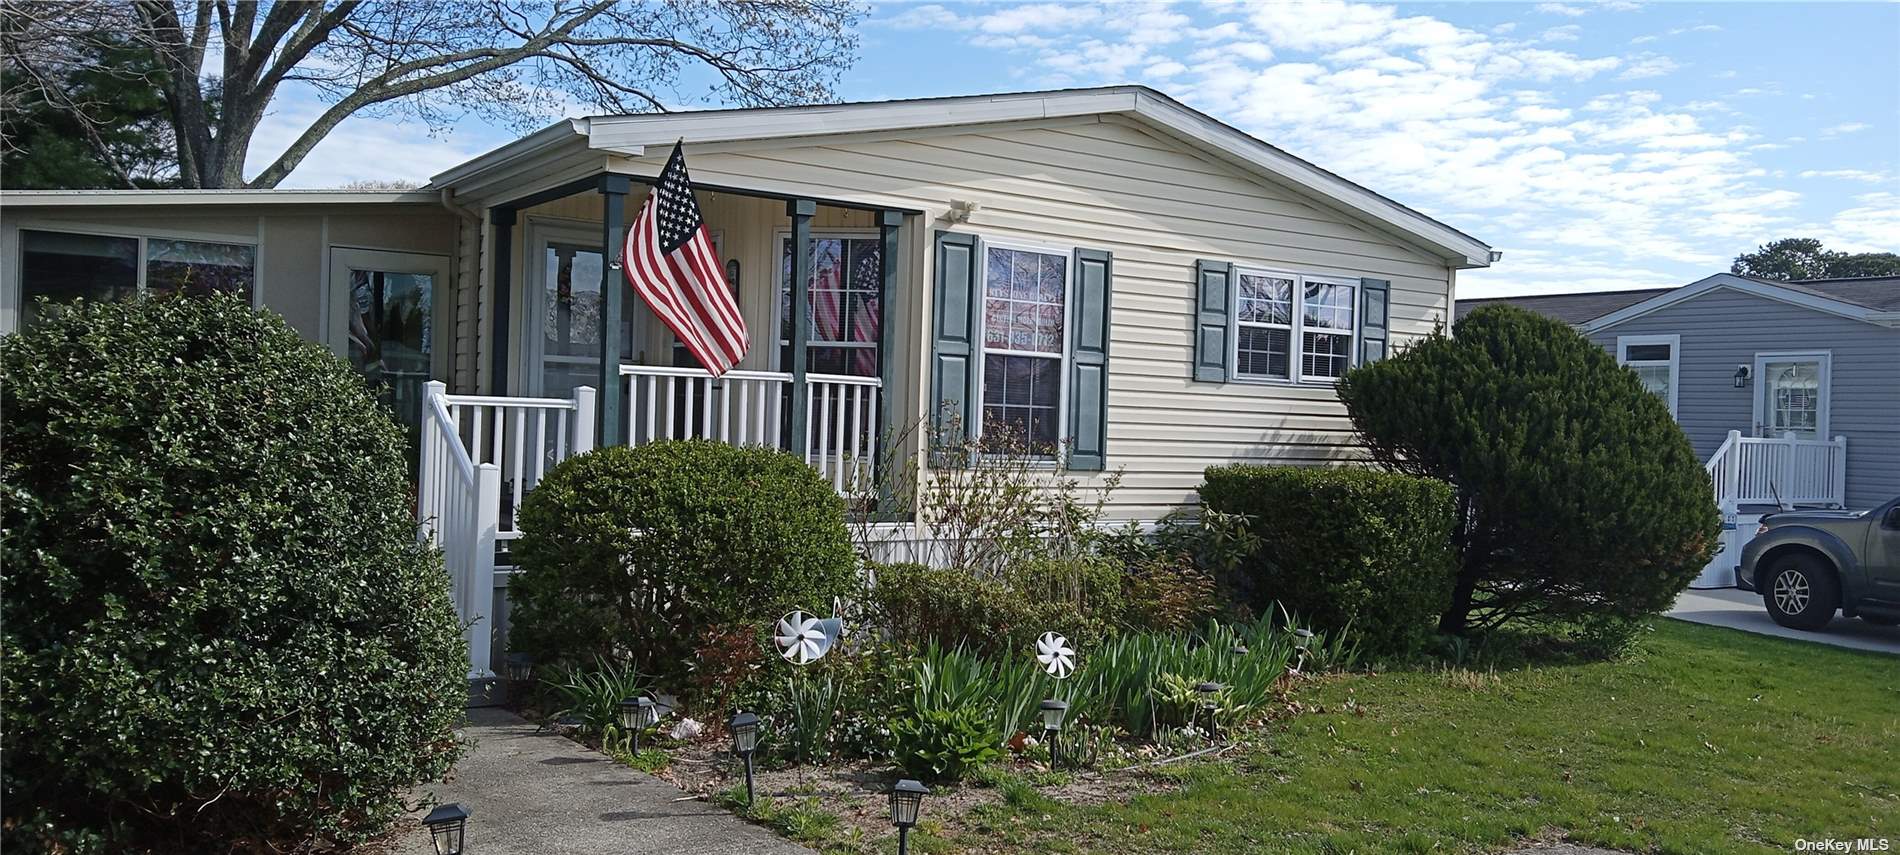 1661345 Old Country, Riverhead, Hamptons, NY - 2 Bedrooms  
2 Bathrooms - 